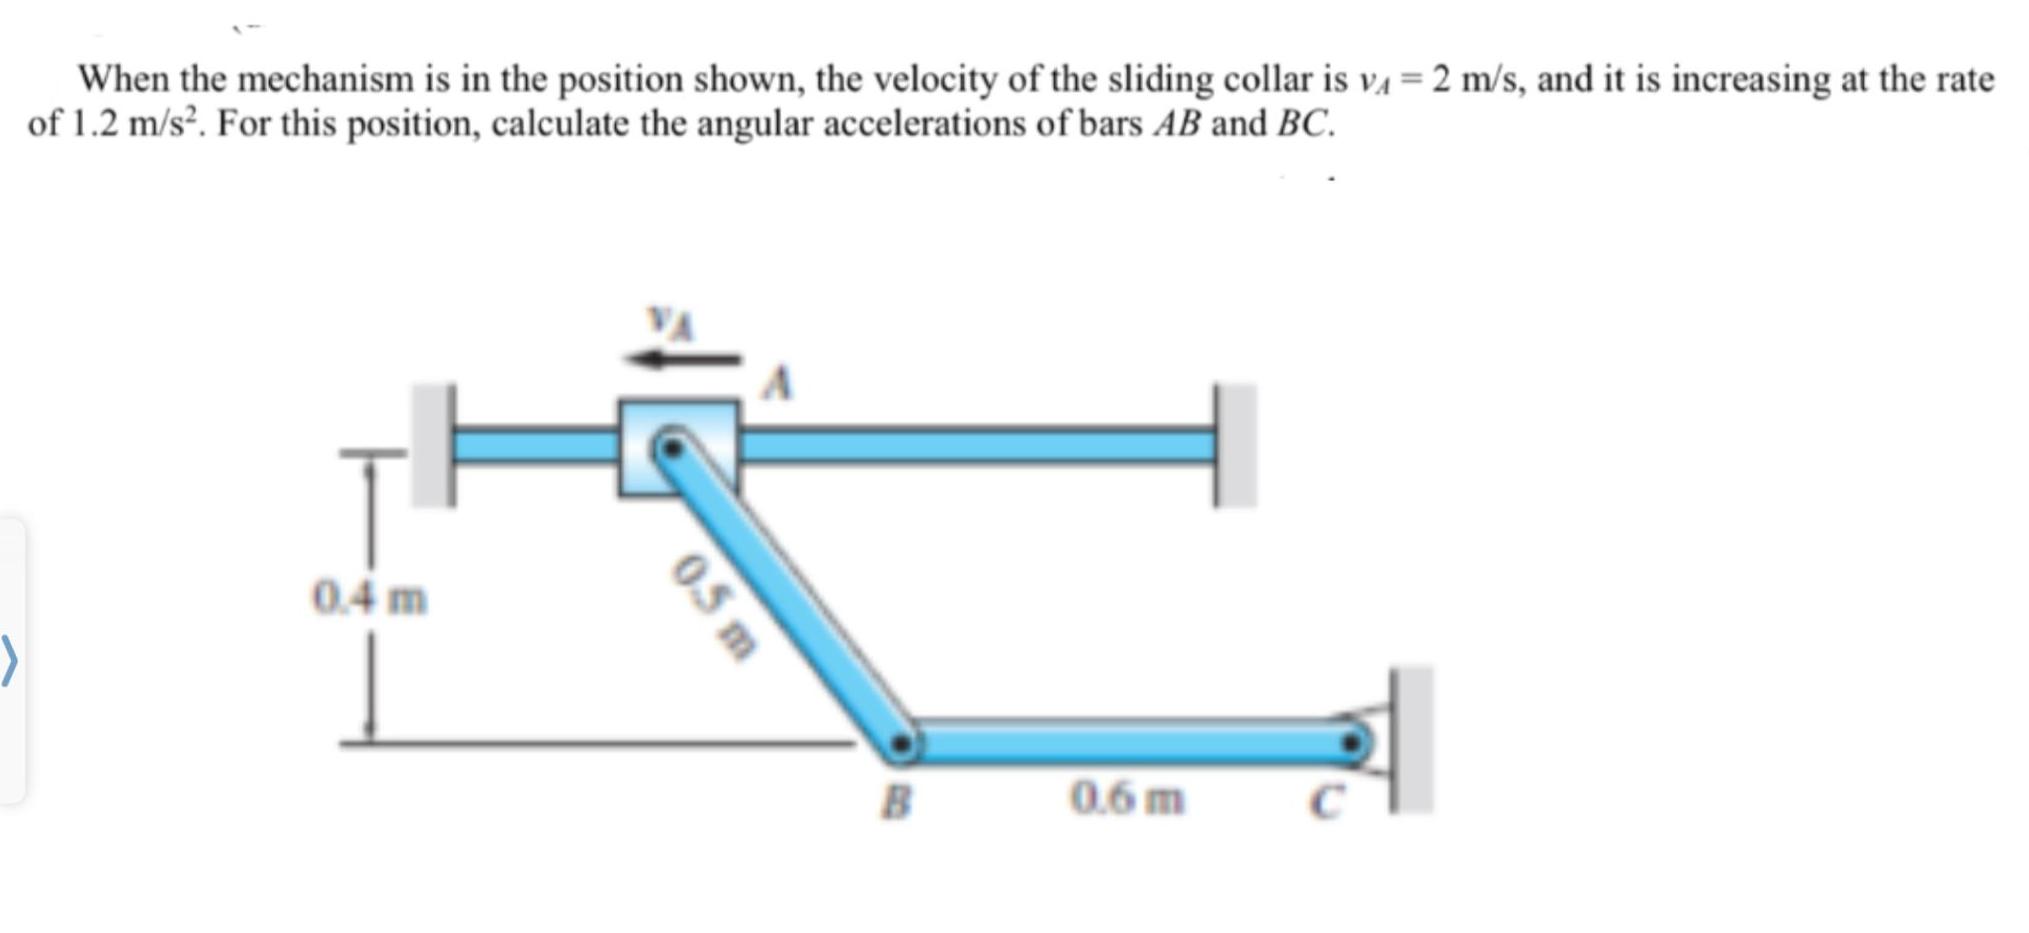 When the mechanism is in the position shown, the velocity of the sliding collar is v =2 m/s, and it is